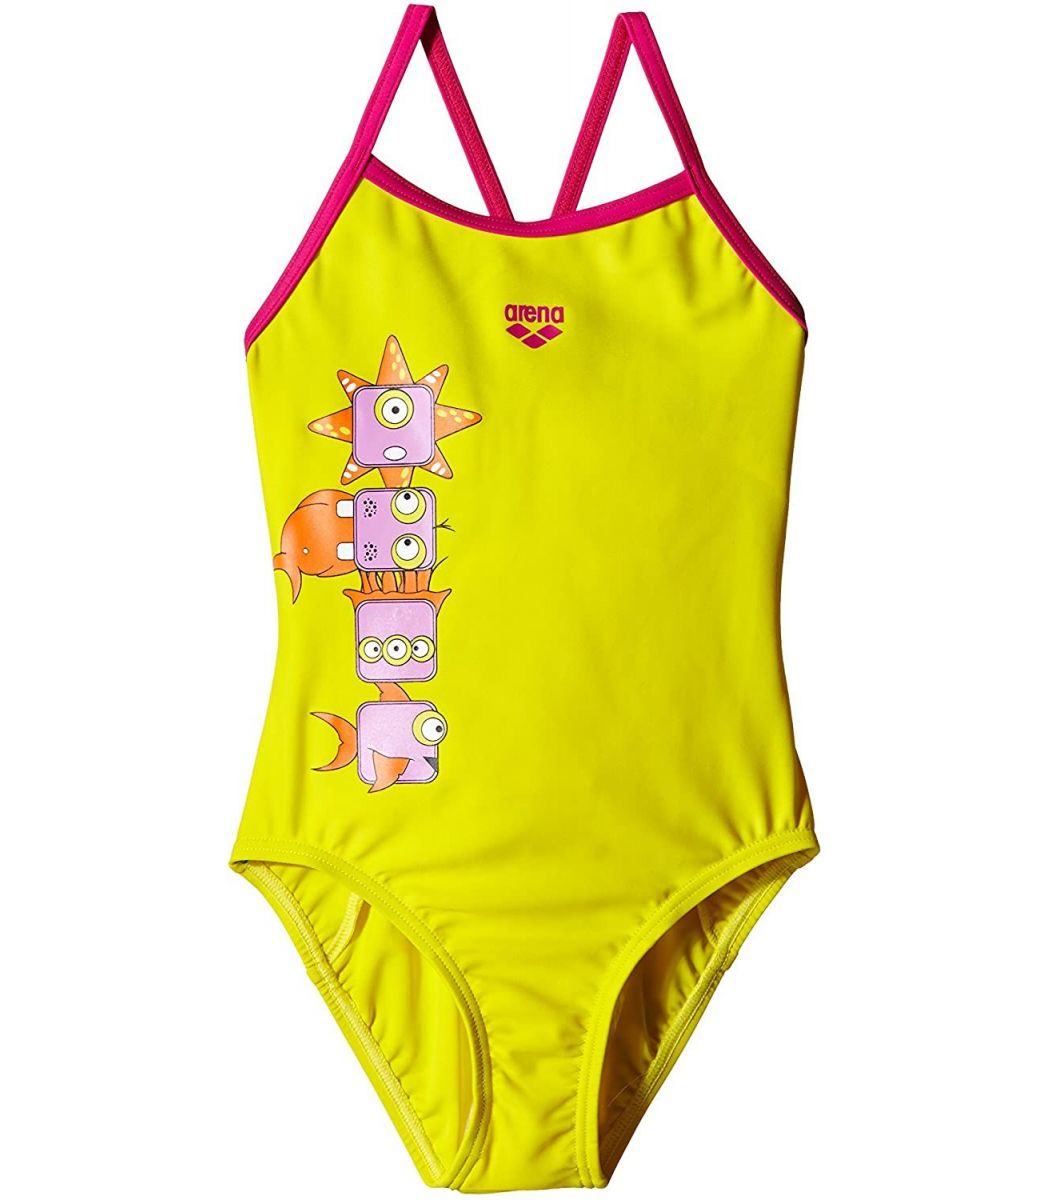 Arena Girl Swimwear Kg Gill Kids One Piece Color Pink Size 2yrs Old